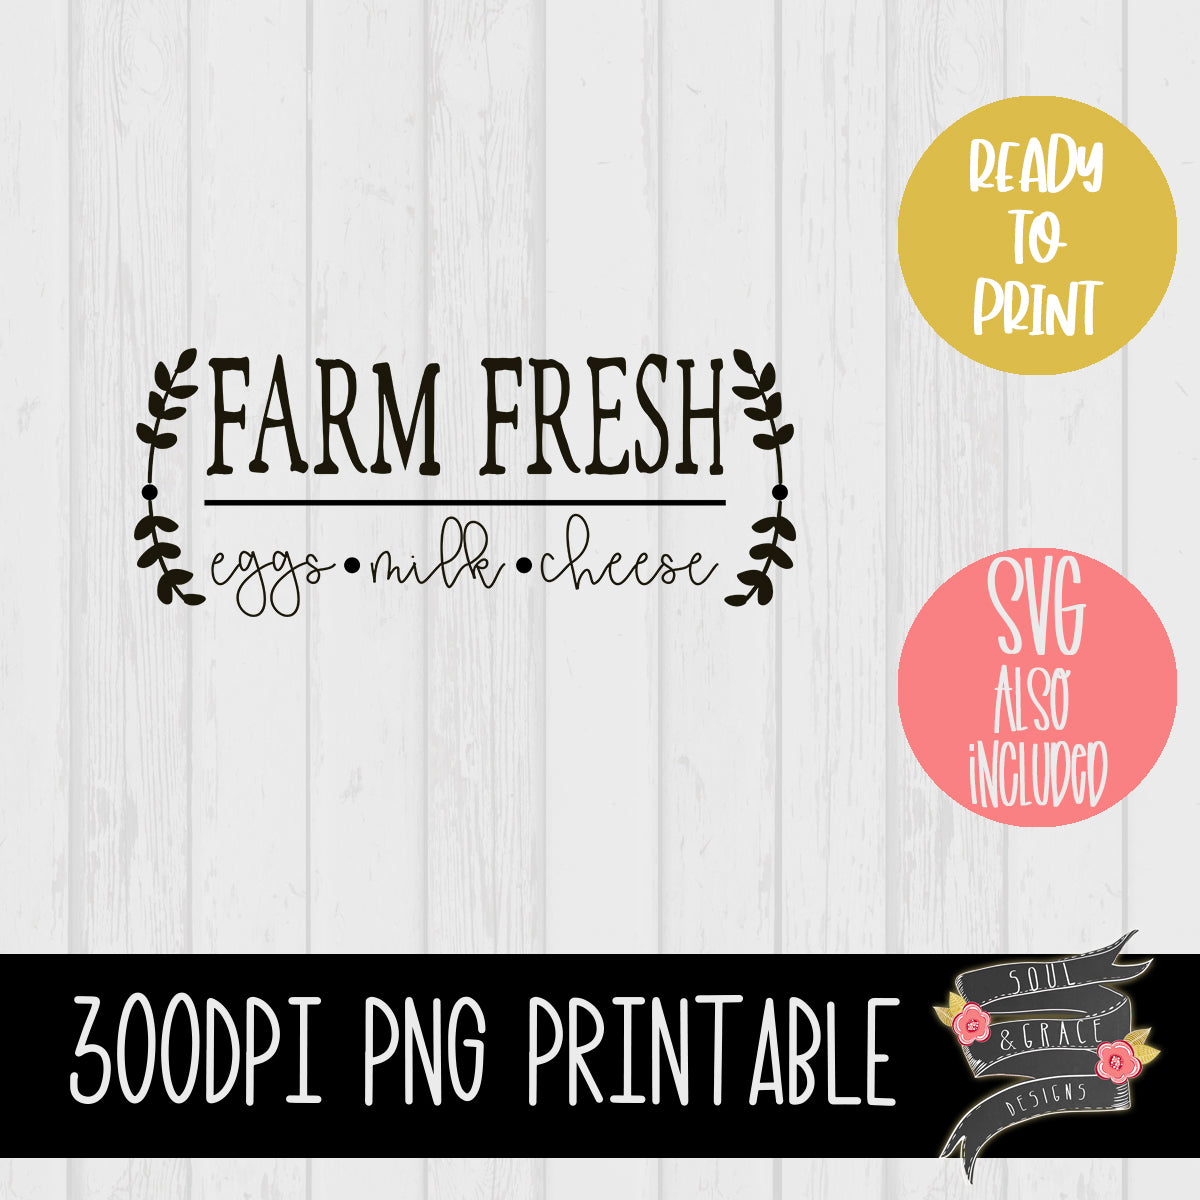 Farm Fresh Eggs Milk Cheese [PNG and SVG]